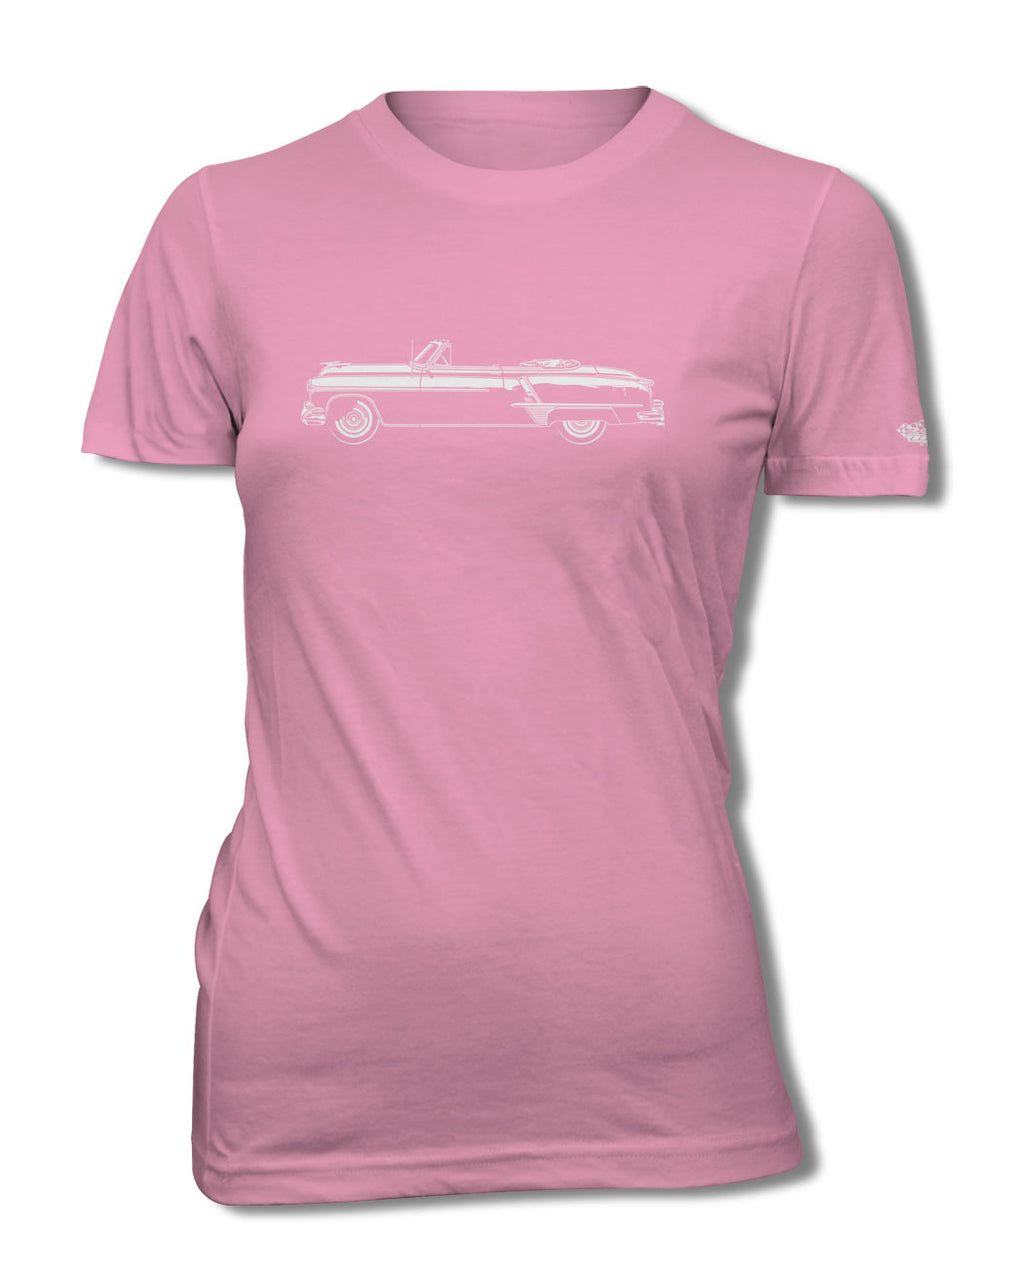 1951 Oldsmobile Super 88 Deluxe Convertible T-Shirt - Women - Side View